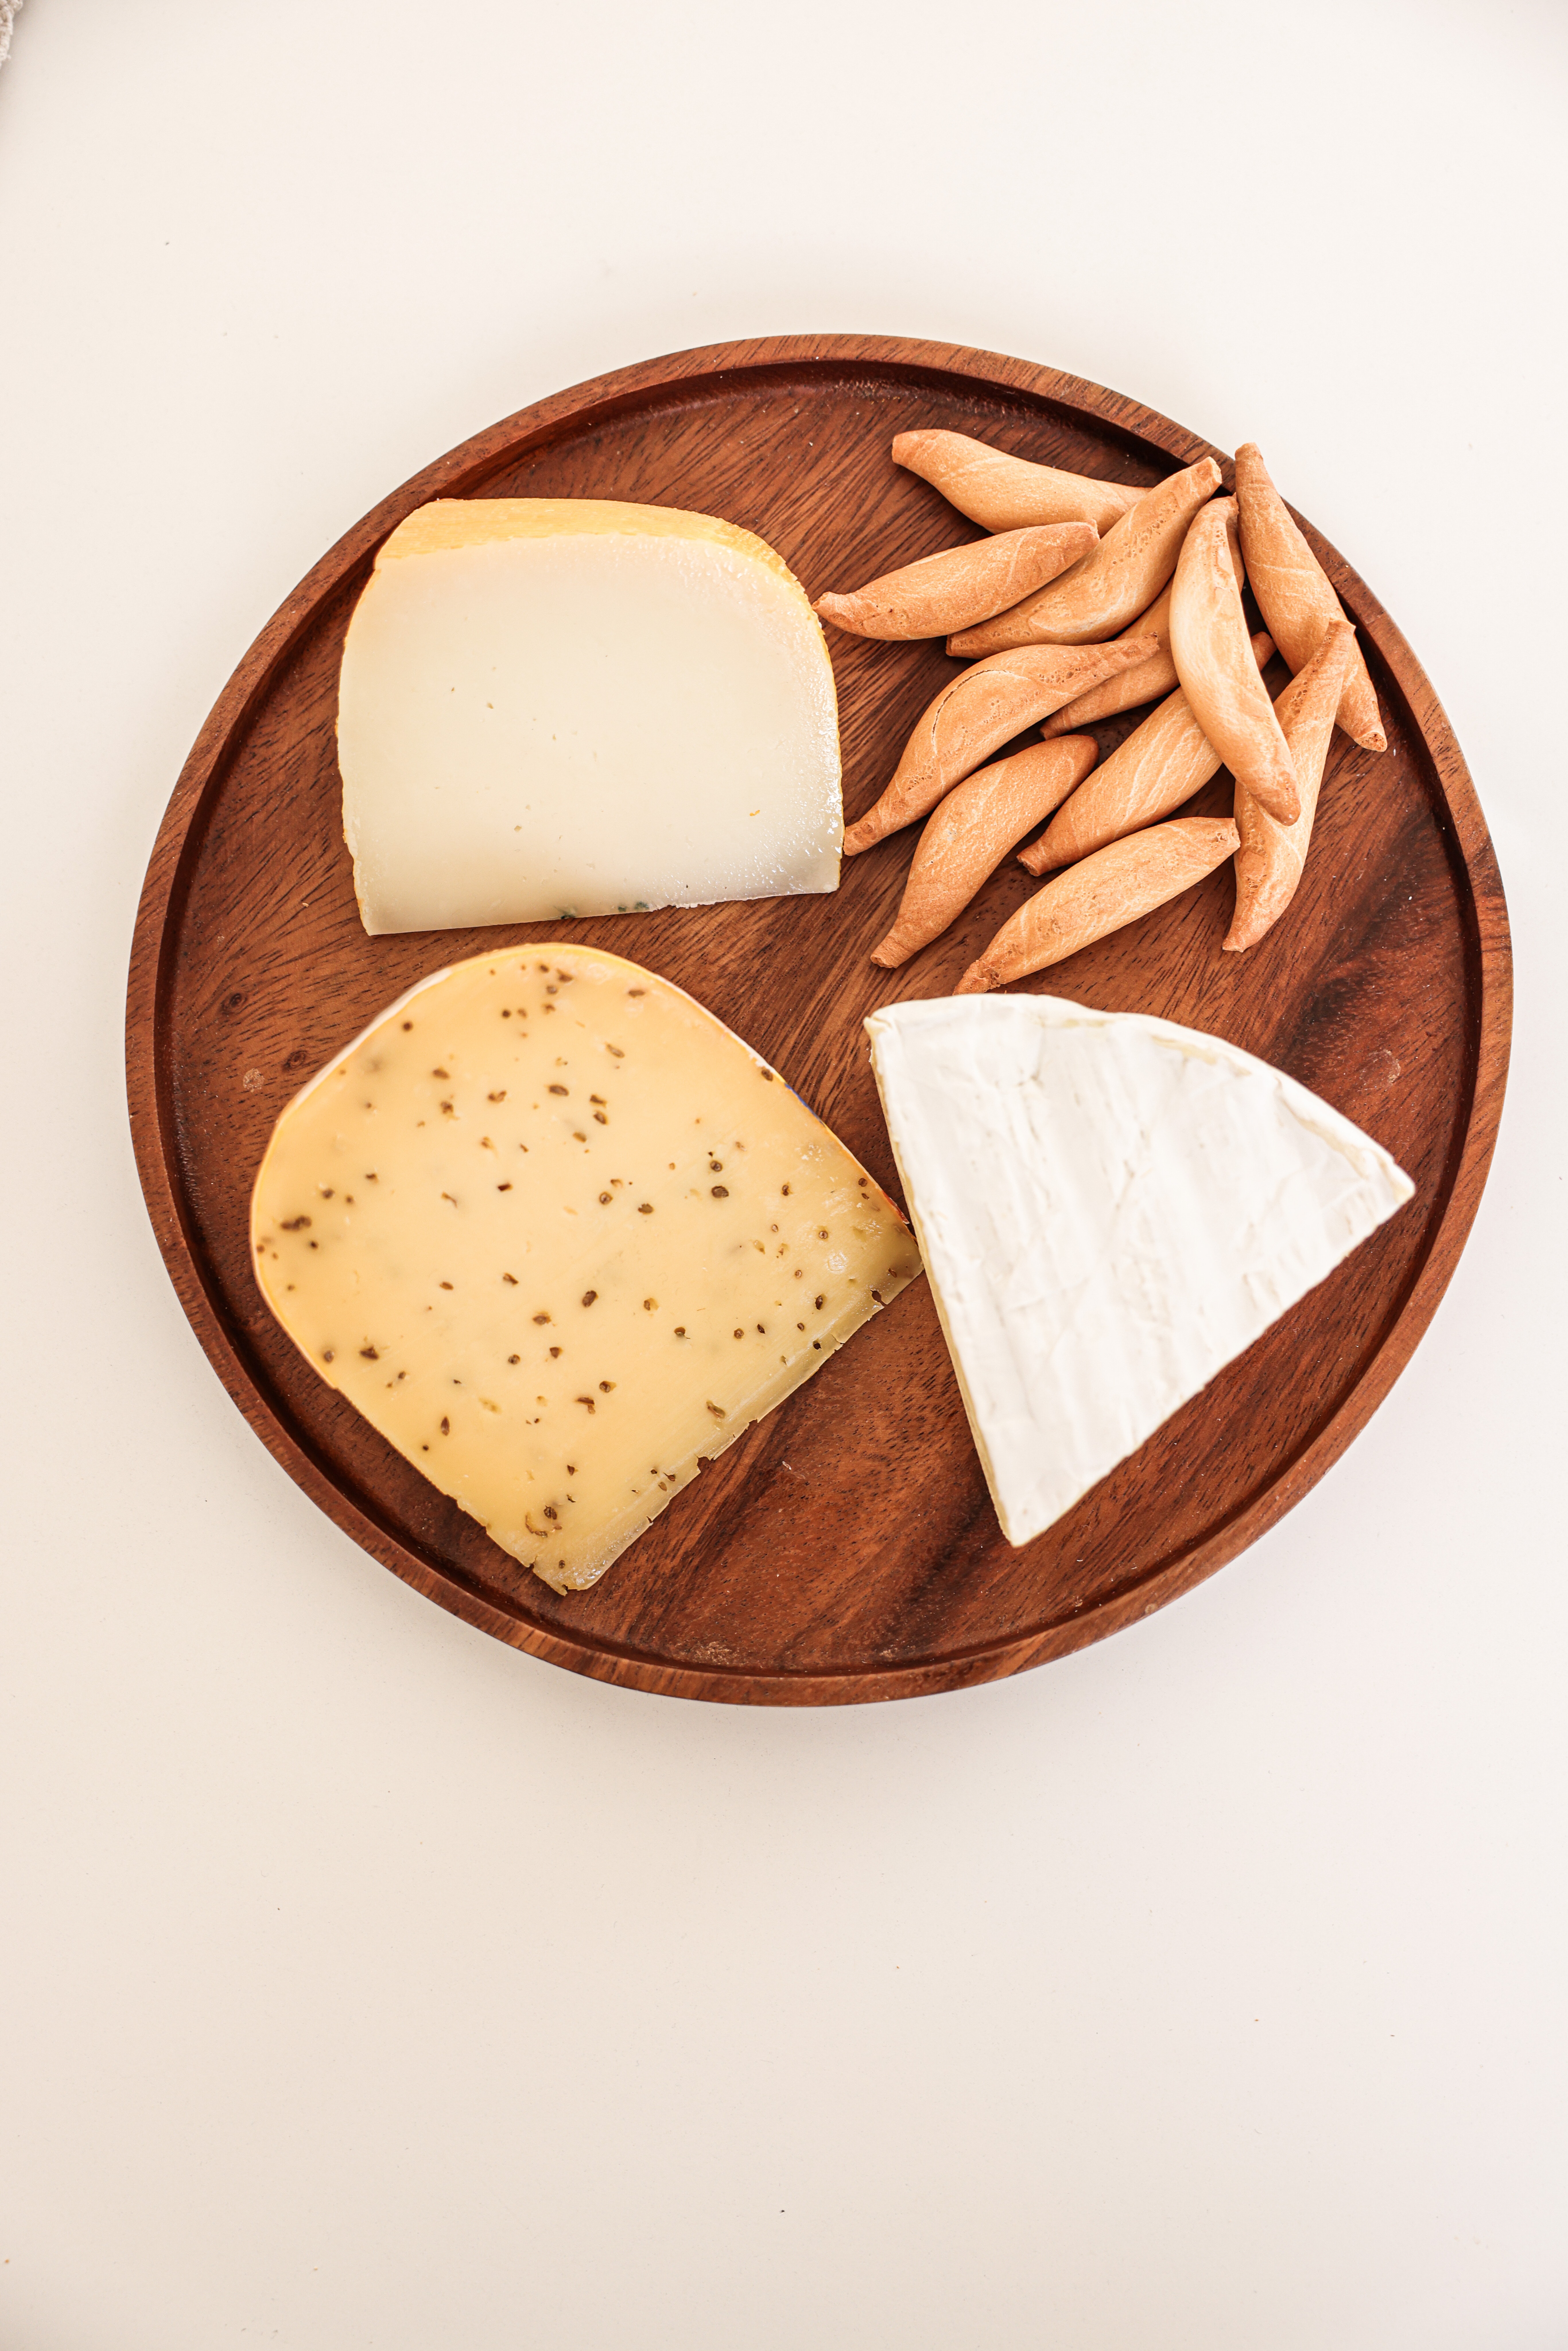 Cheese tray | Source: Pexels